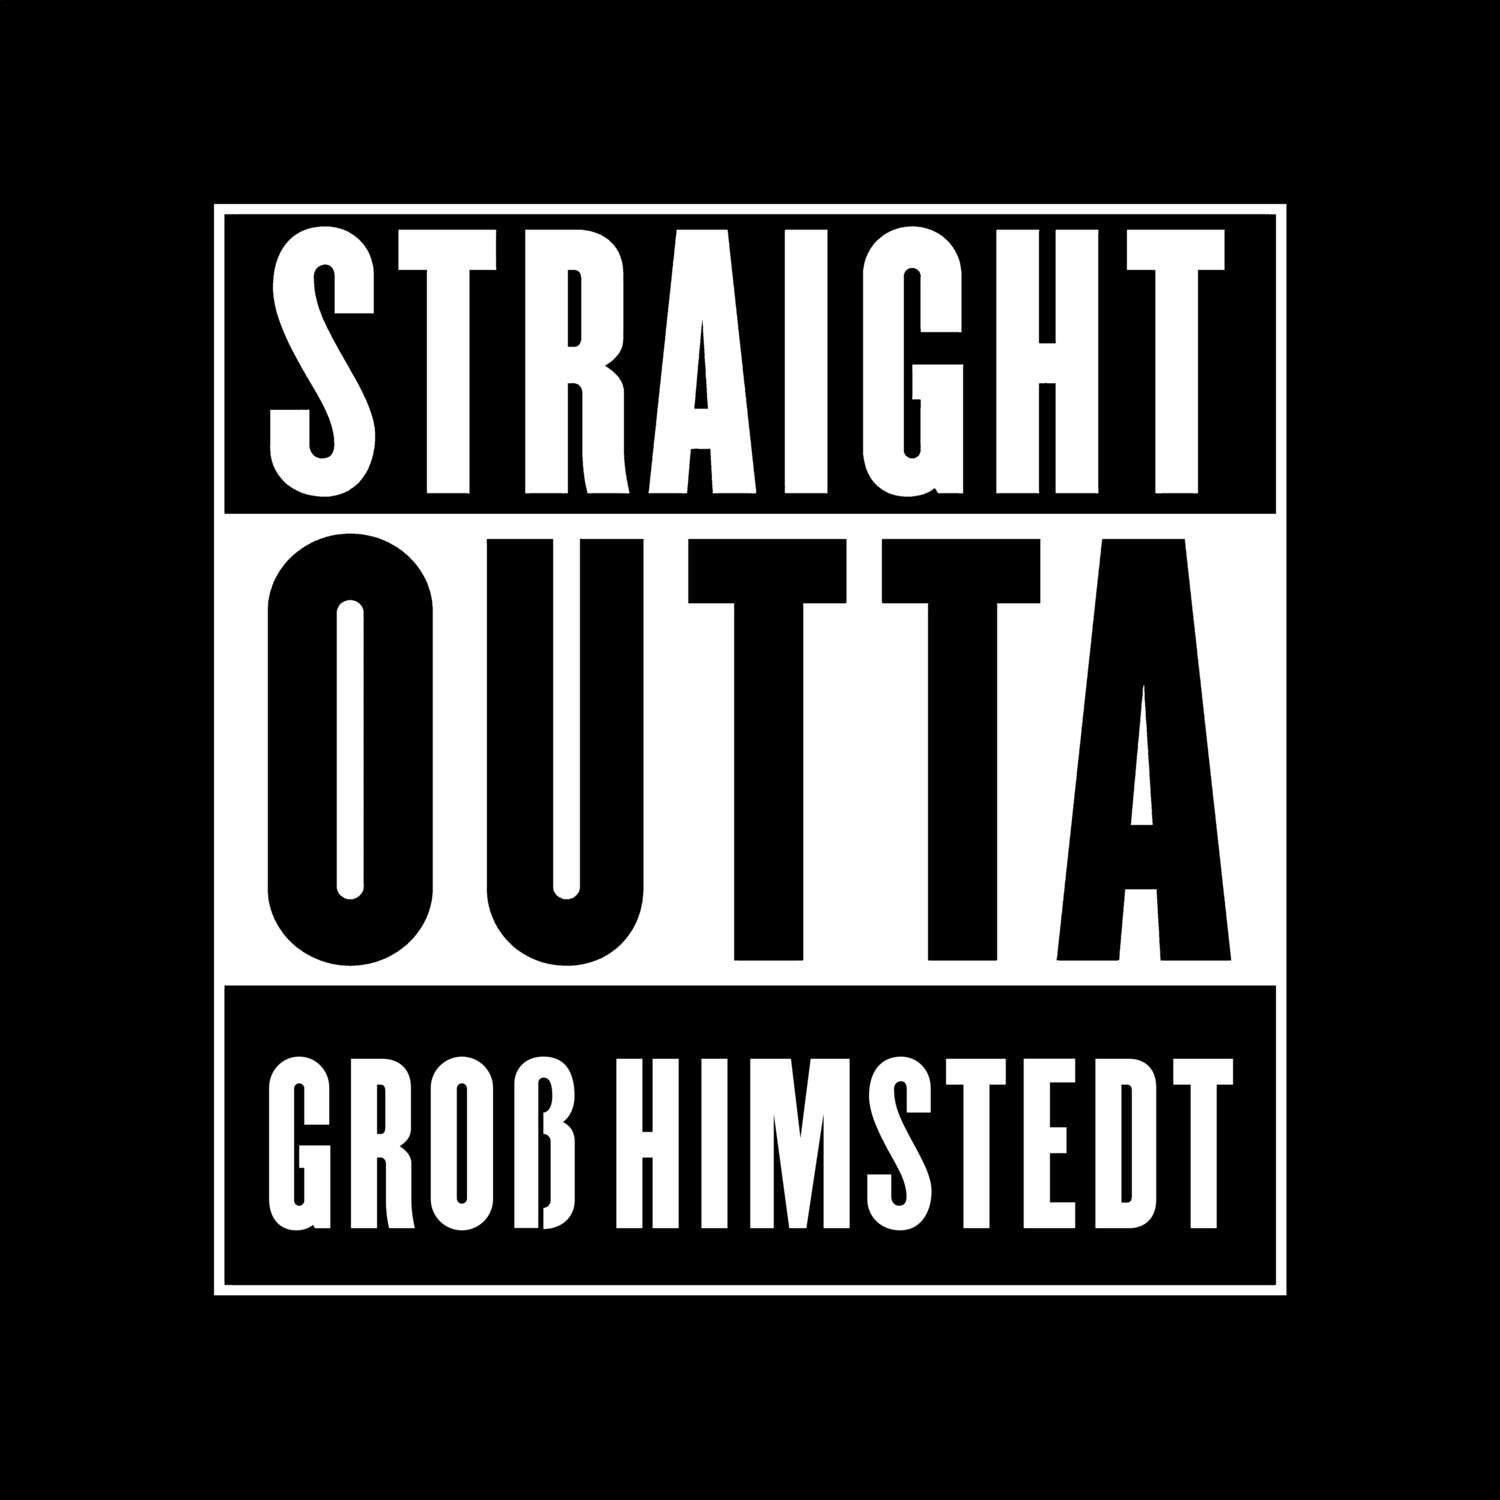 Groß Himstedt T-Shirt »Straight Outta«